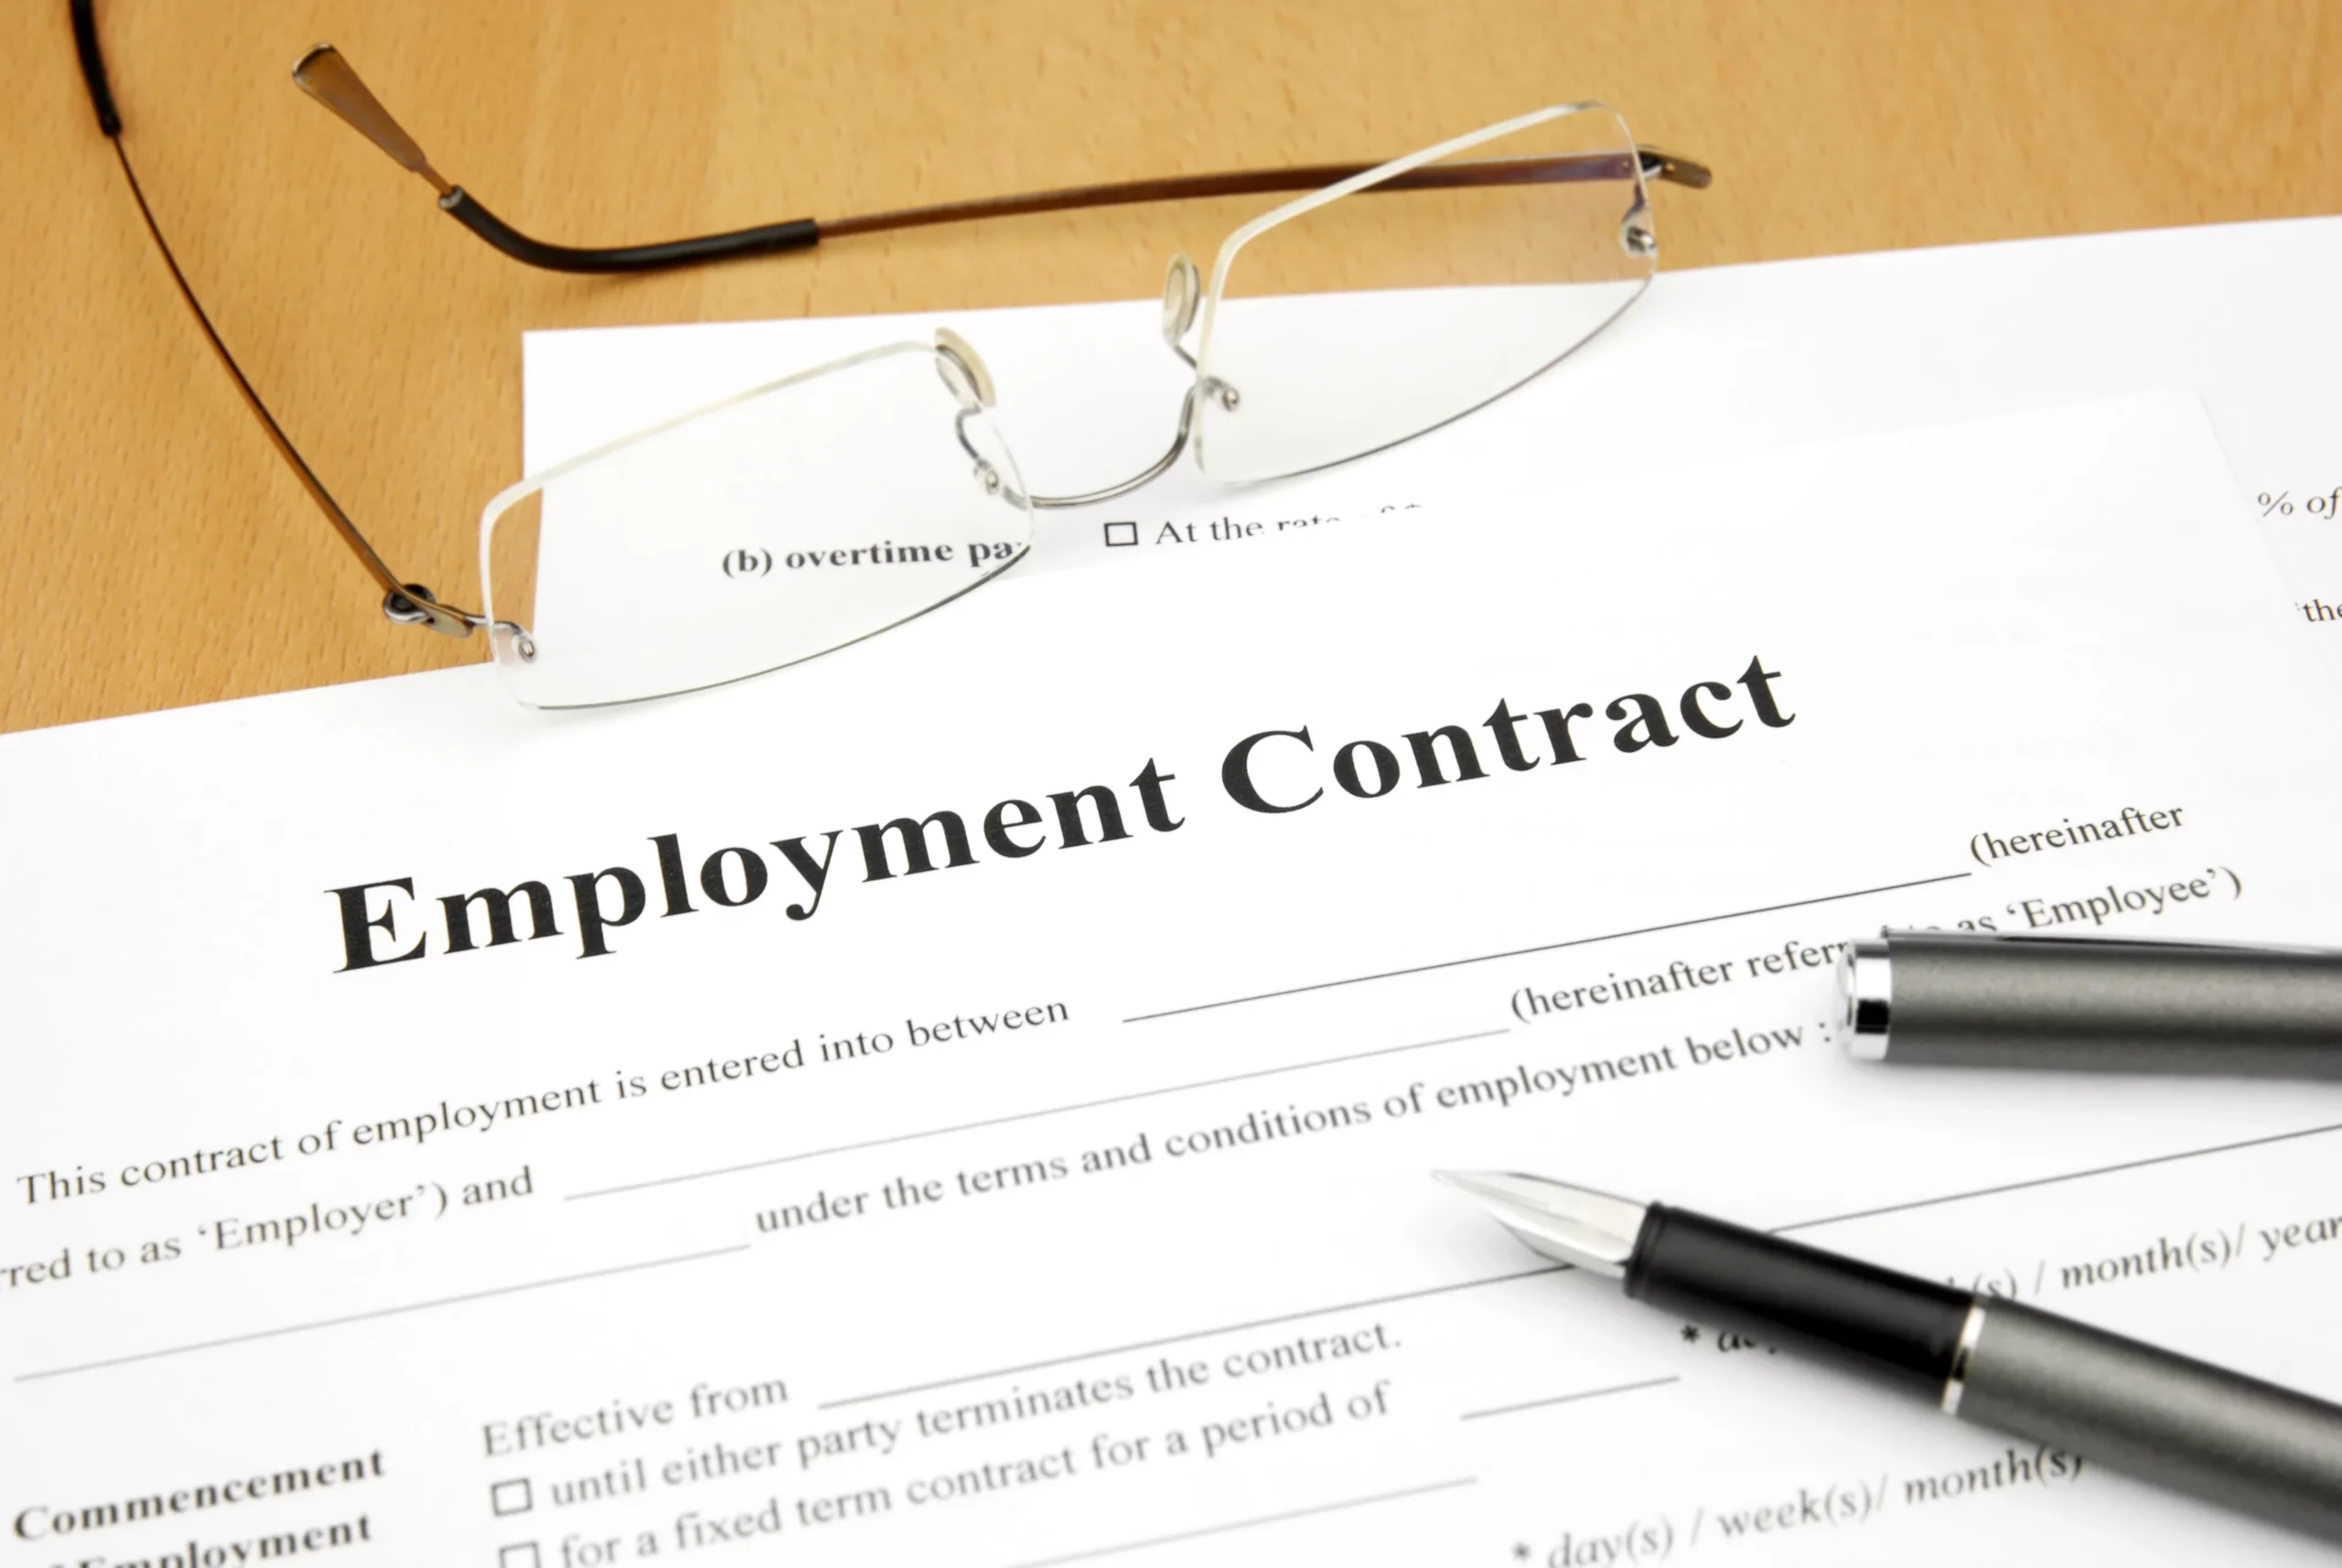 An employment contract is part of employees statutory rights